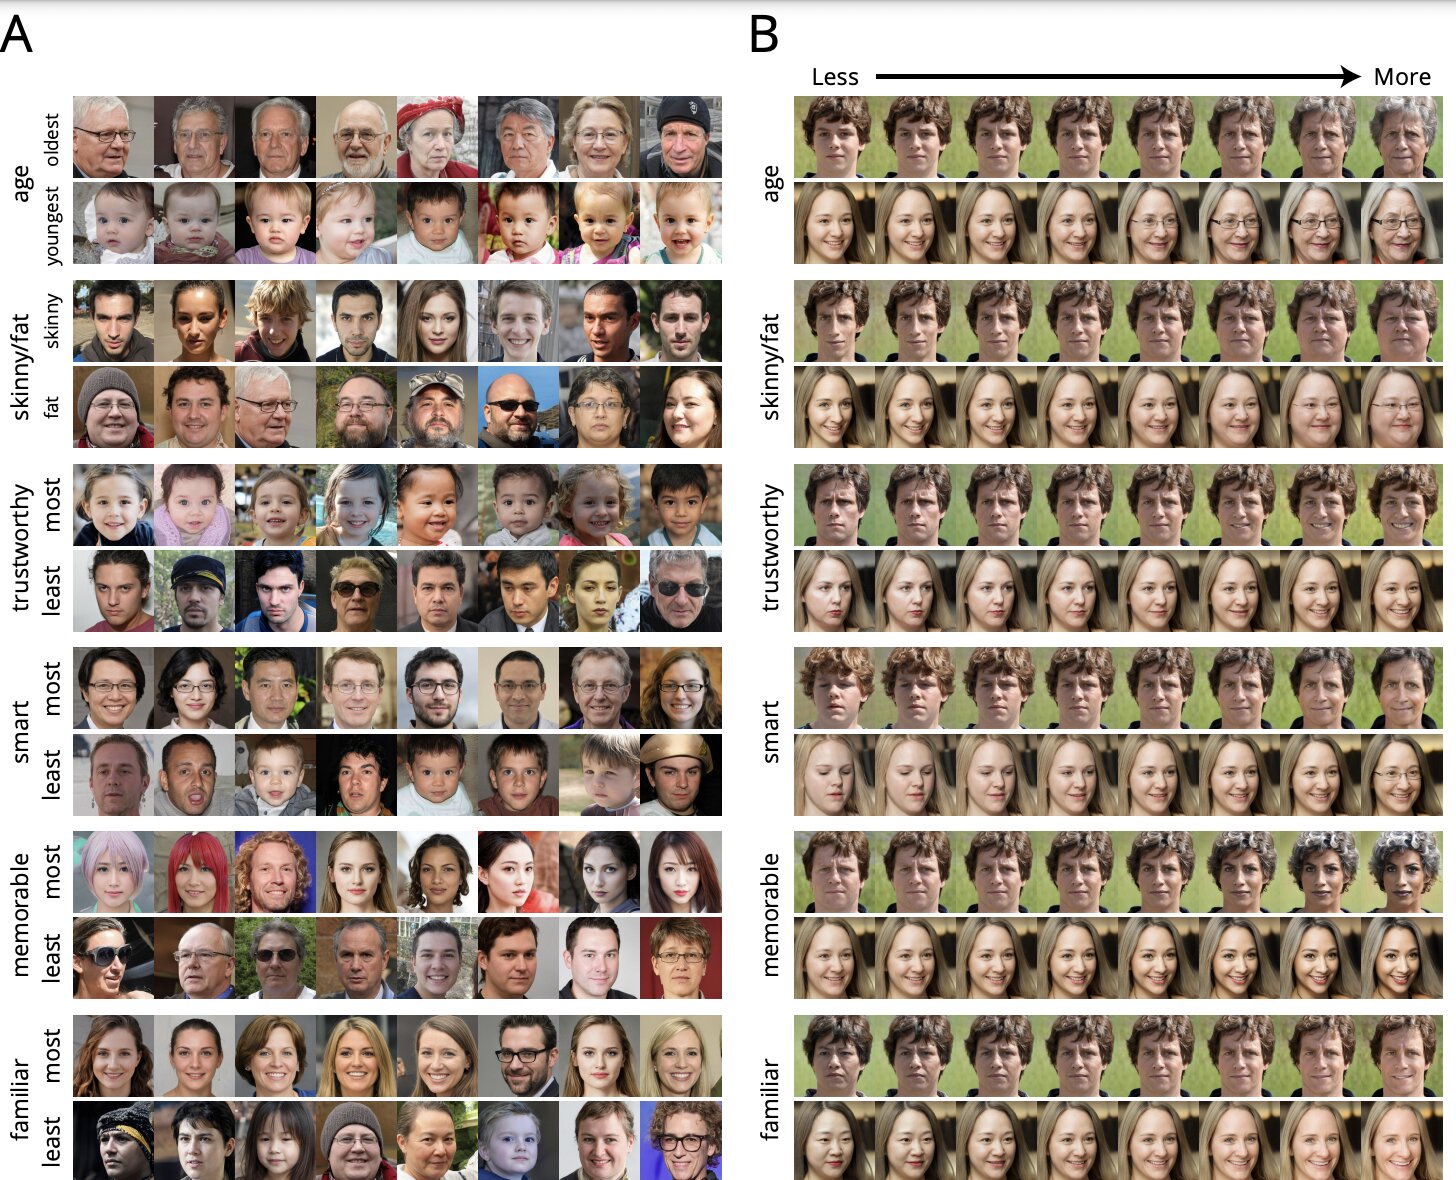 Using deep learning to predict users’ superficial judgments of human faces